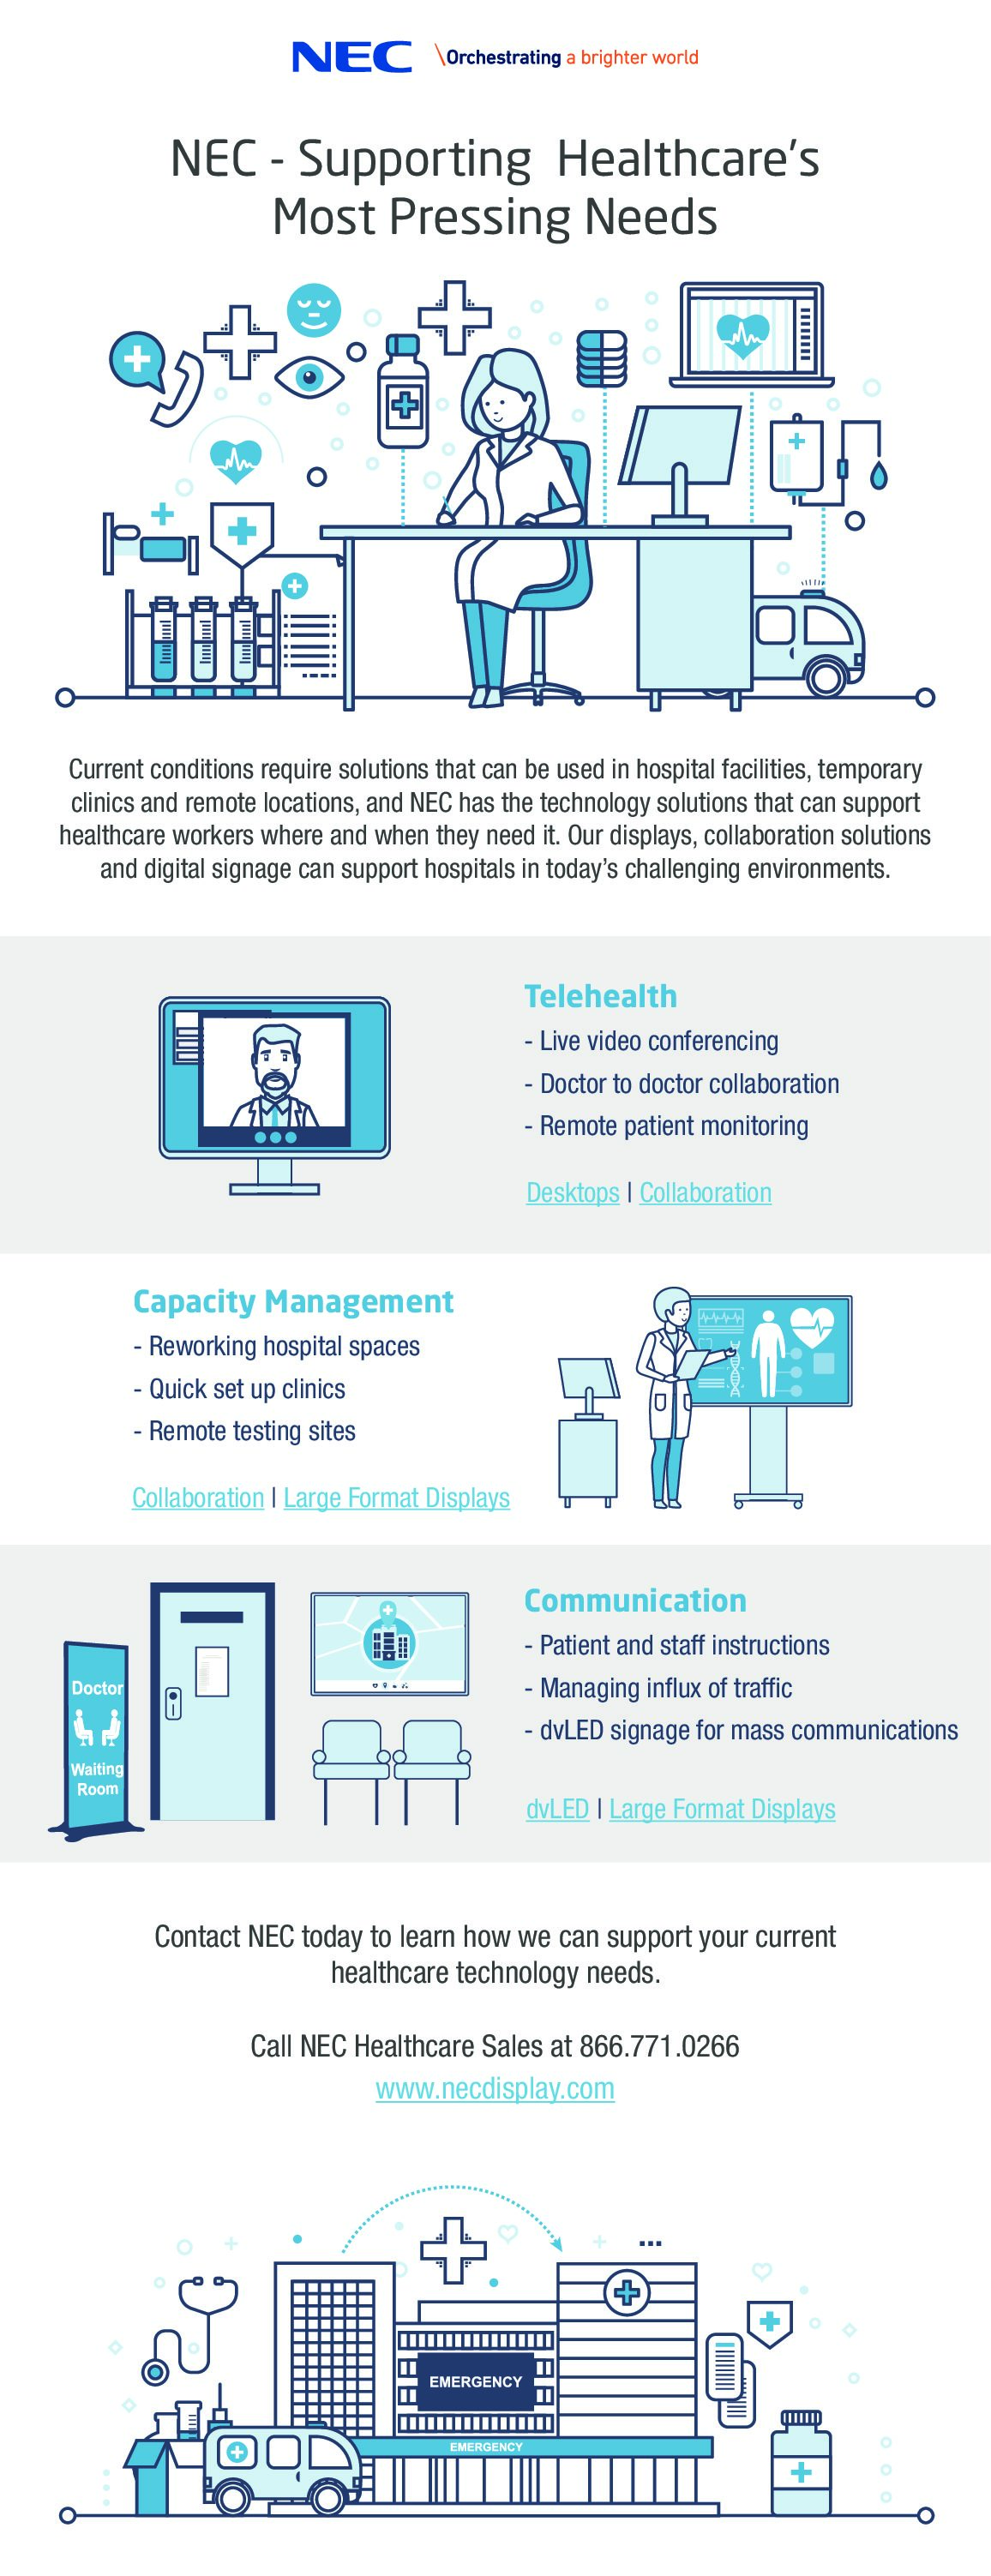 nec-supporting-healthcare-infographic